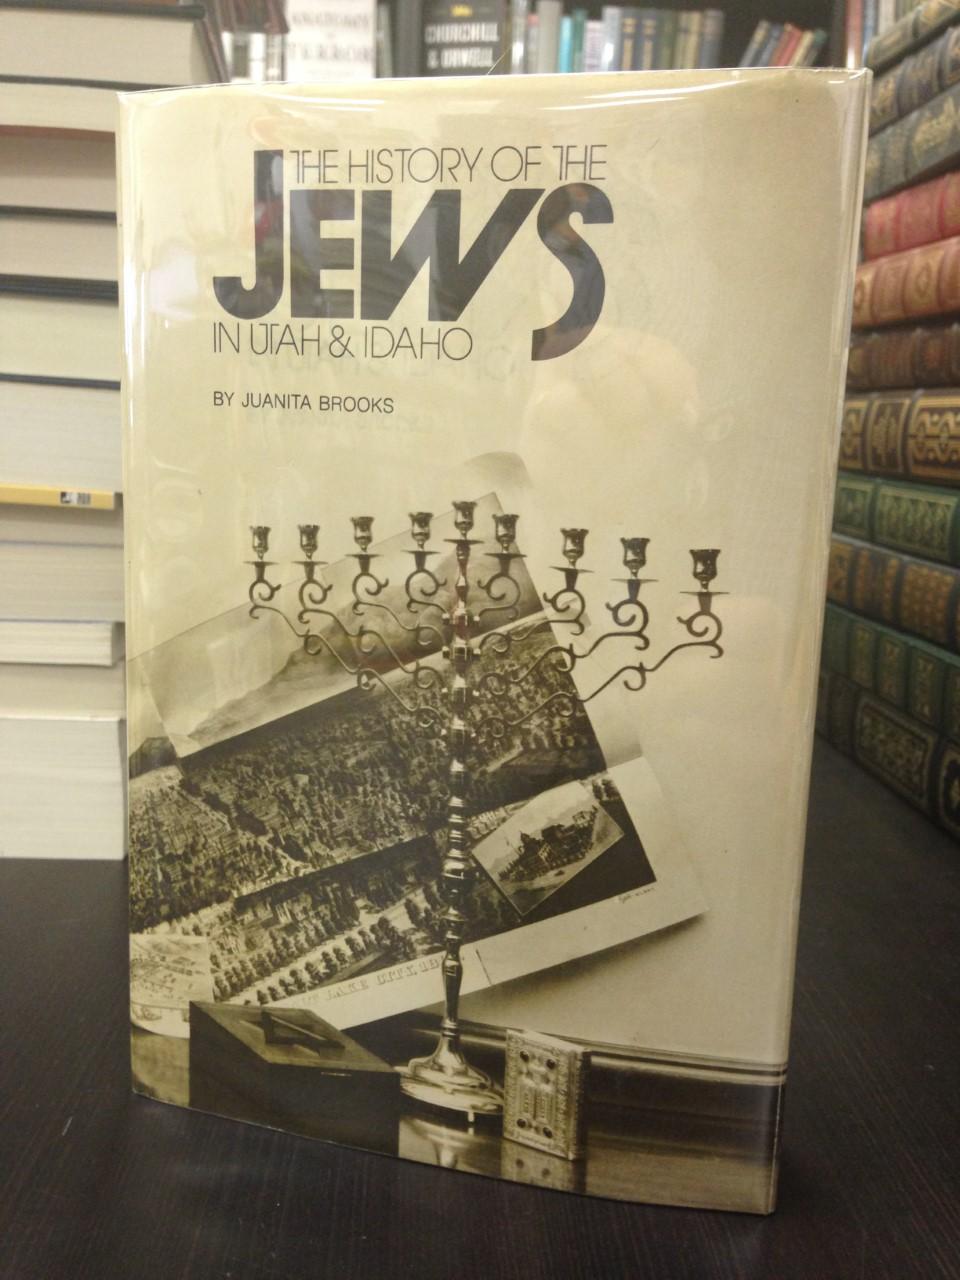 History of the Jews in Utah and Idaho (book cover)